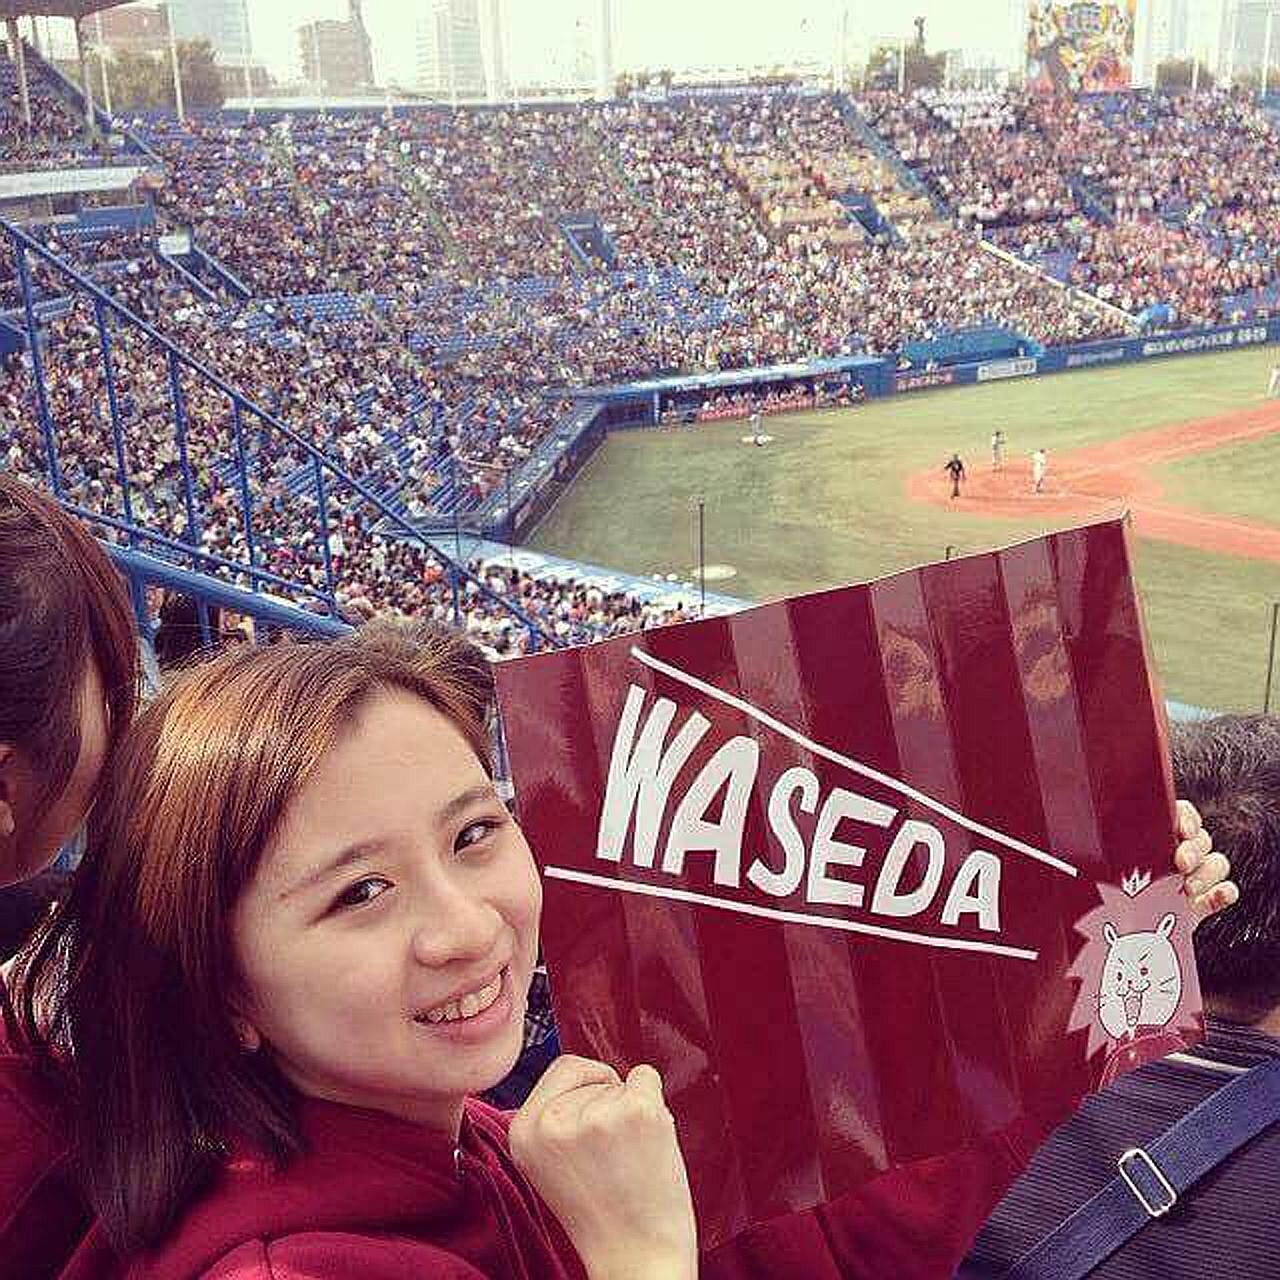 The writer supporting her university's baseball team in a tournament against sports archrival Keio University.